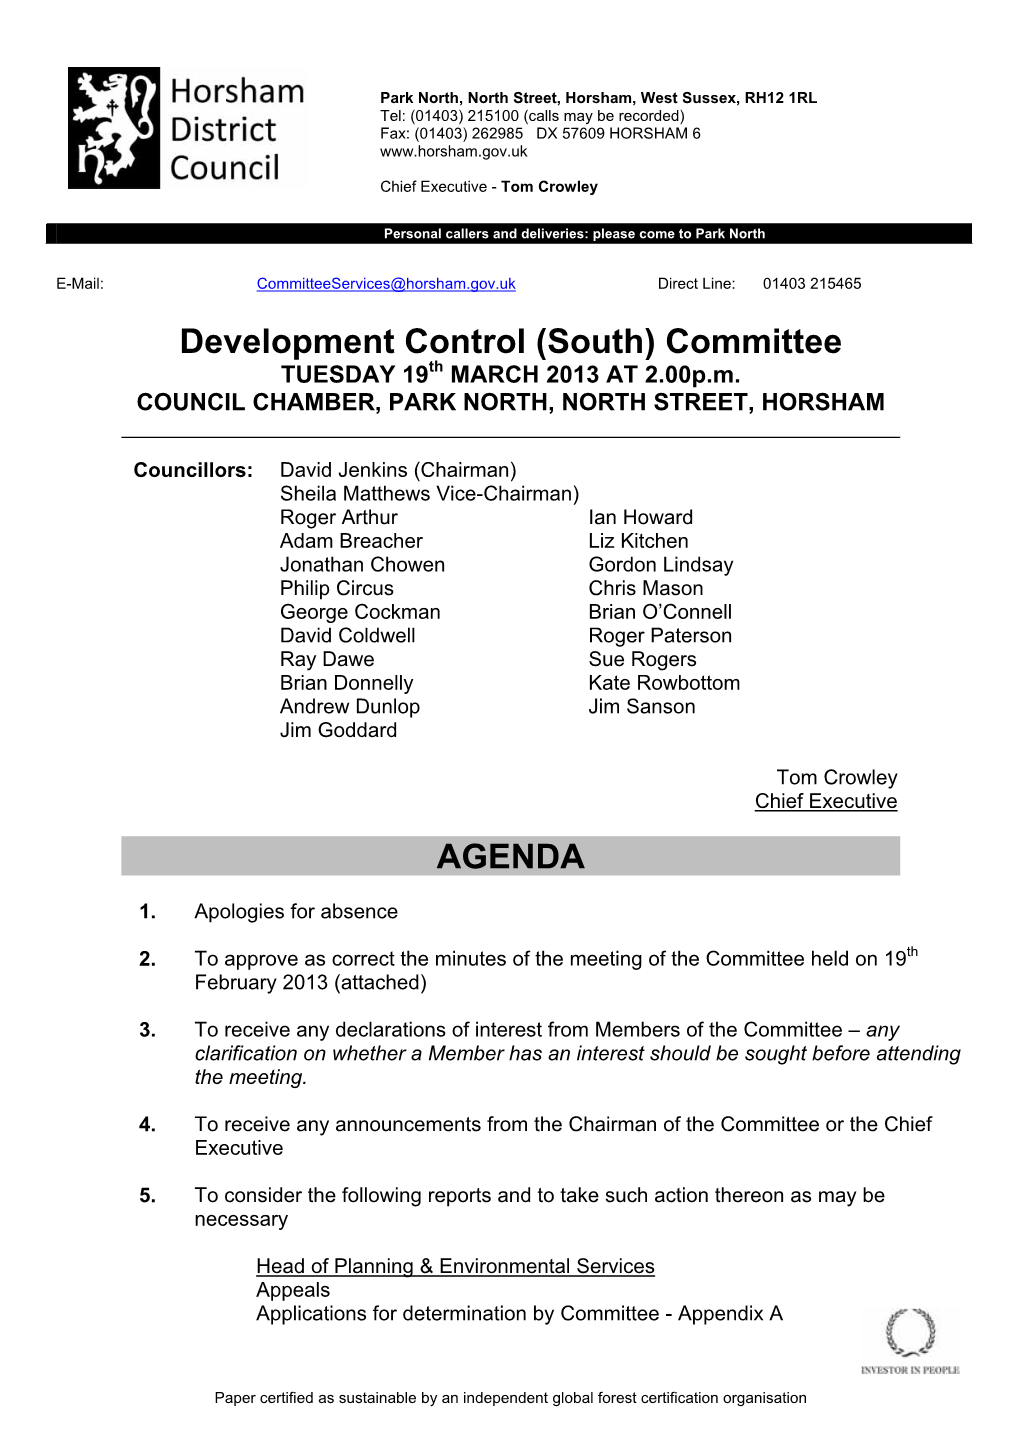 South) Committee TUESDAY 19Th MARCH 2013 at 2.00P.M